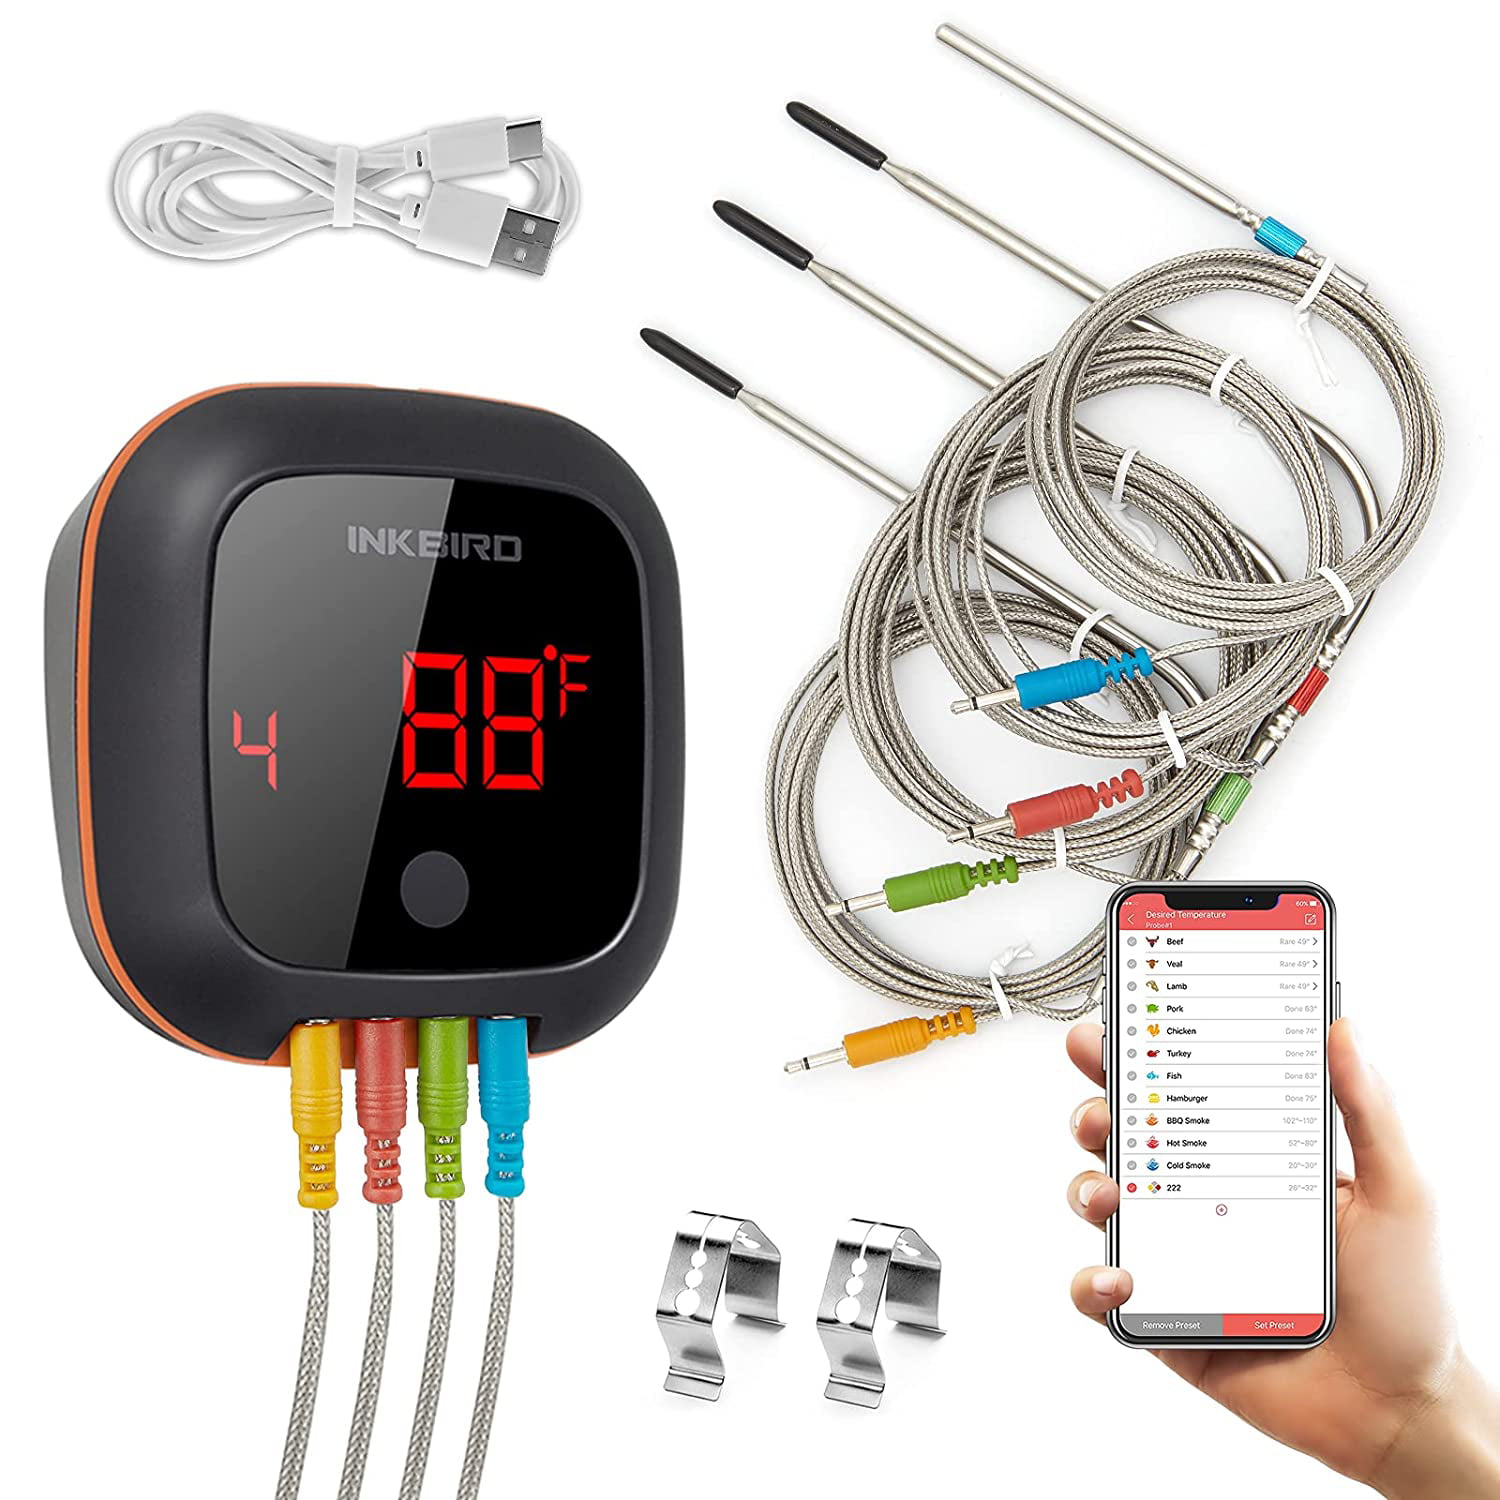 Inkbird Wireless Grilling Temperature Thermometer Smoker Cooking Timer Control 